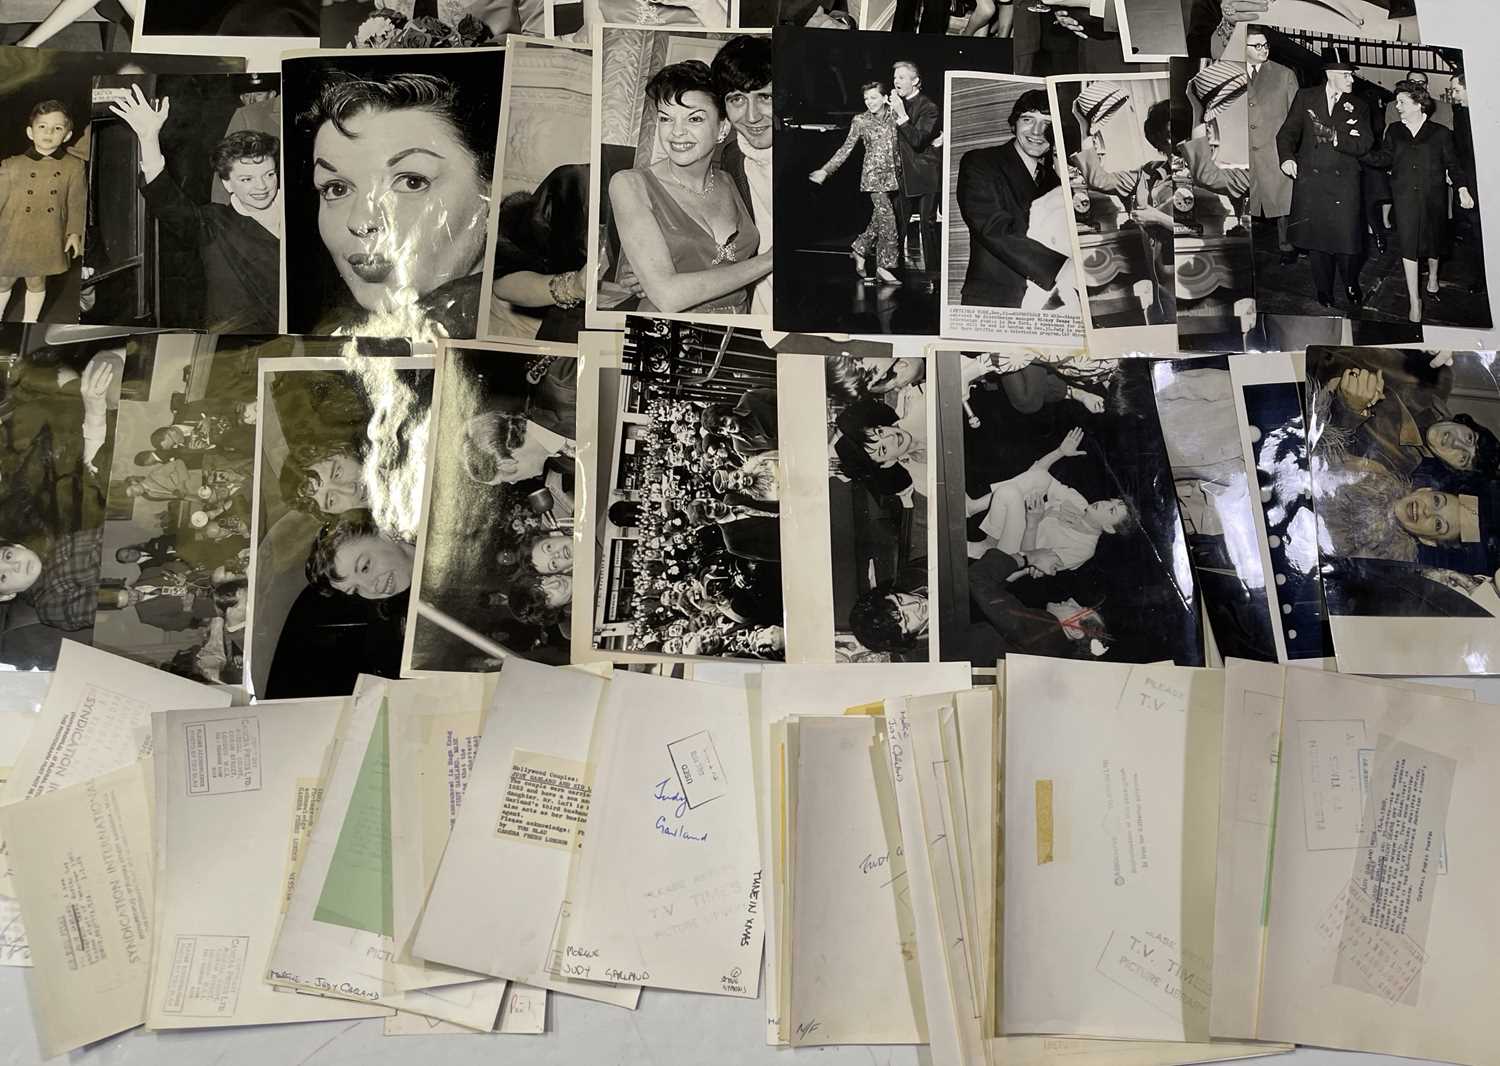 JUDY GARLAND - LARGE COLLECTION OF PRESS PHOTOGRAPHS. - Image 2 of 2